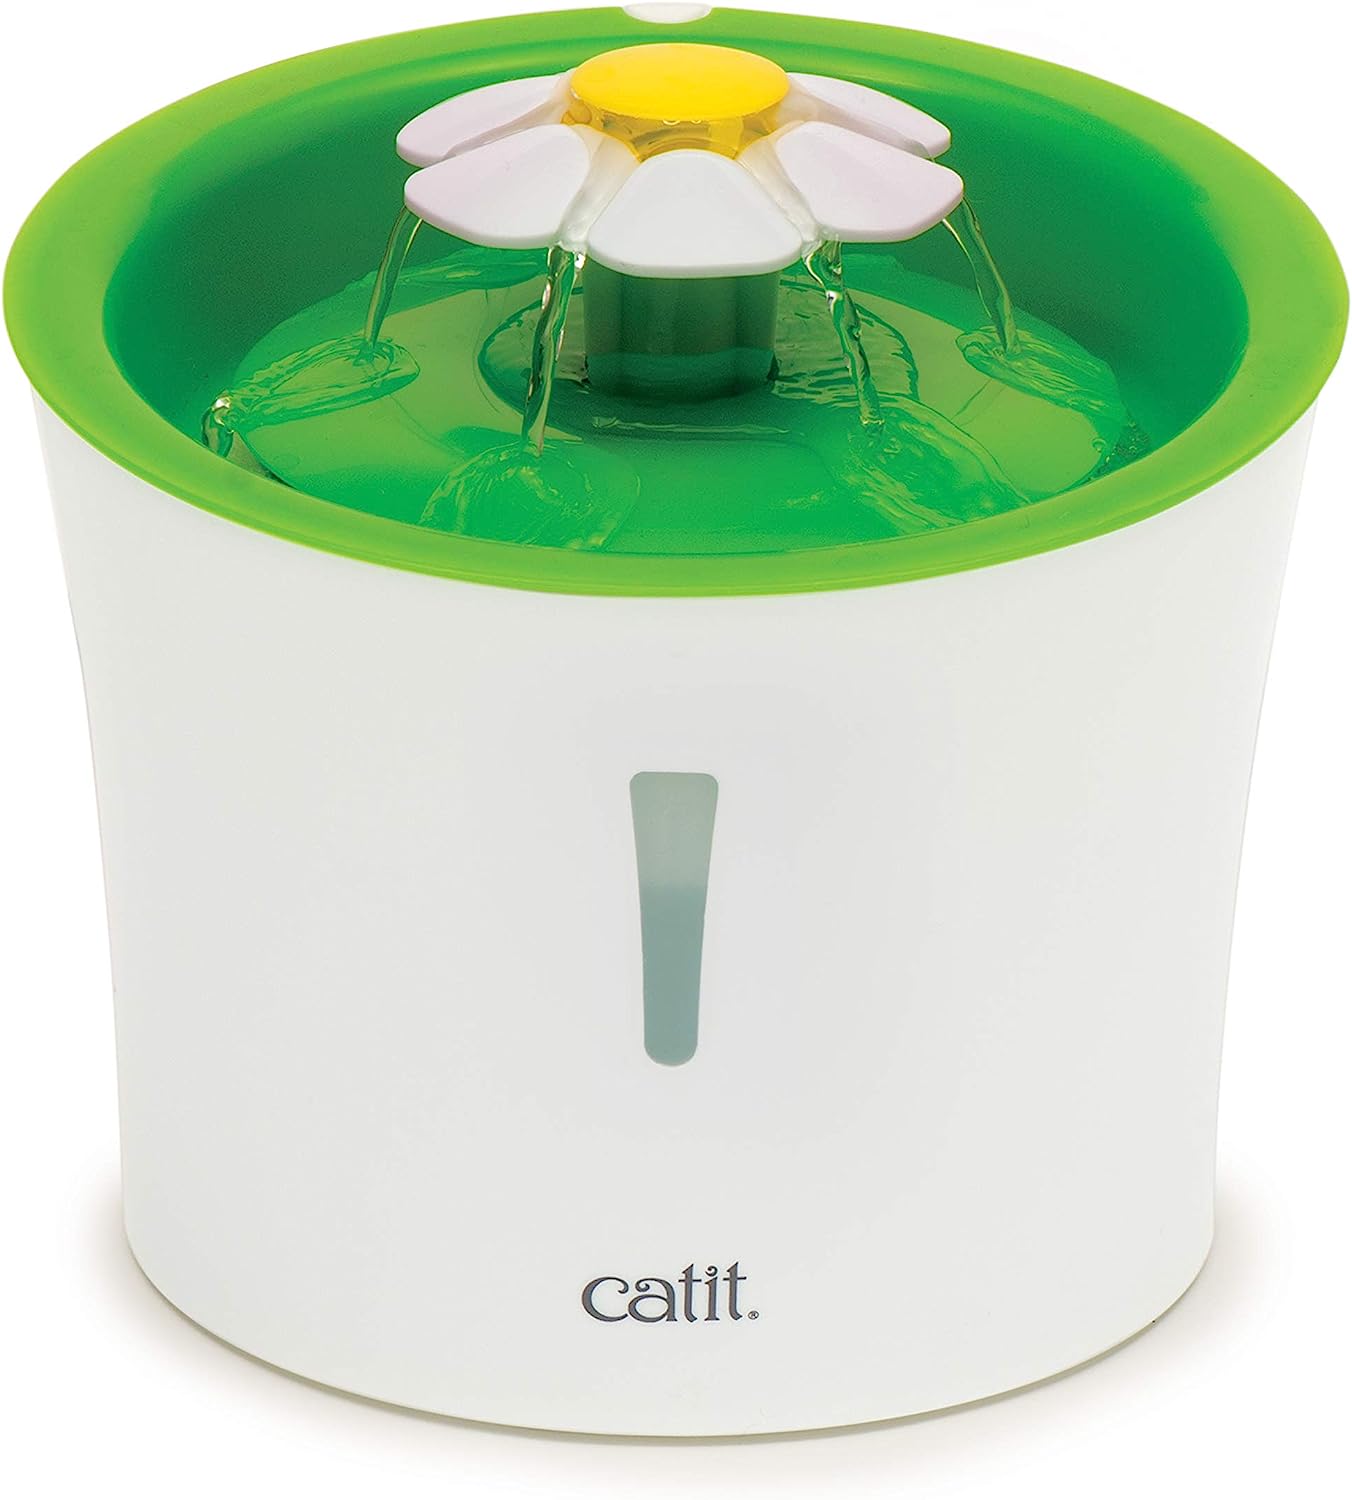 Catit Flower Fountain with Triple Action Filter